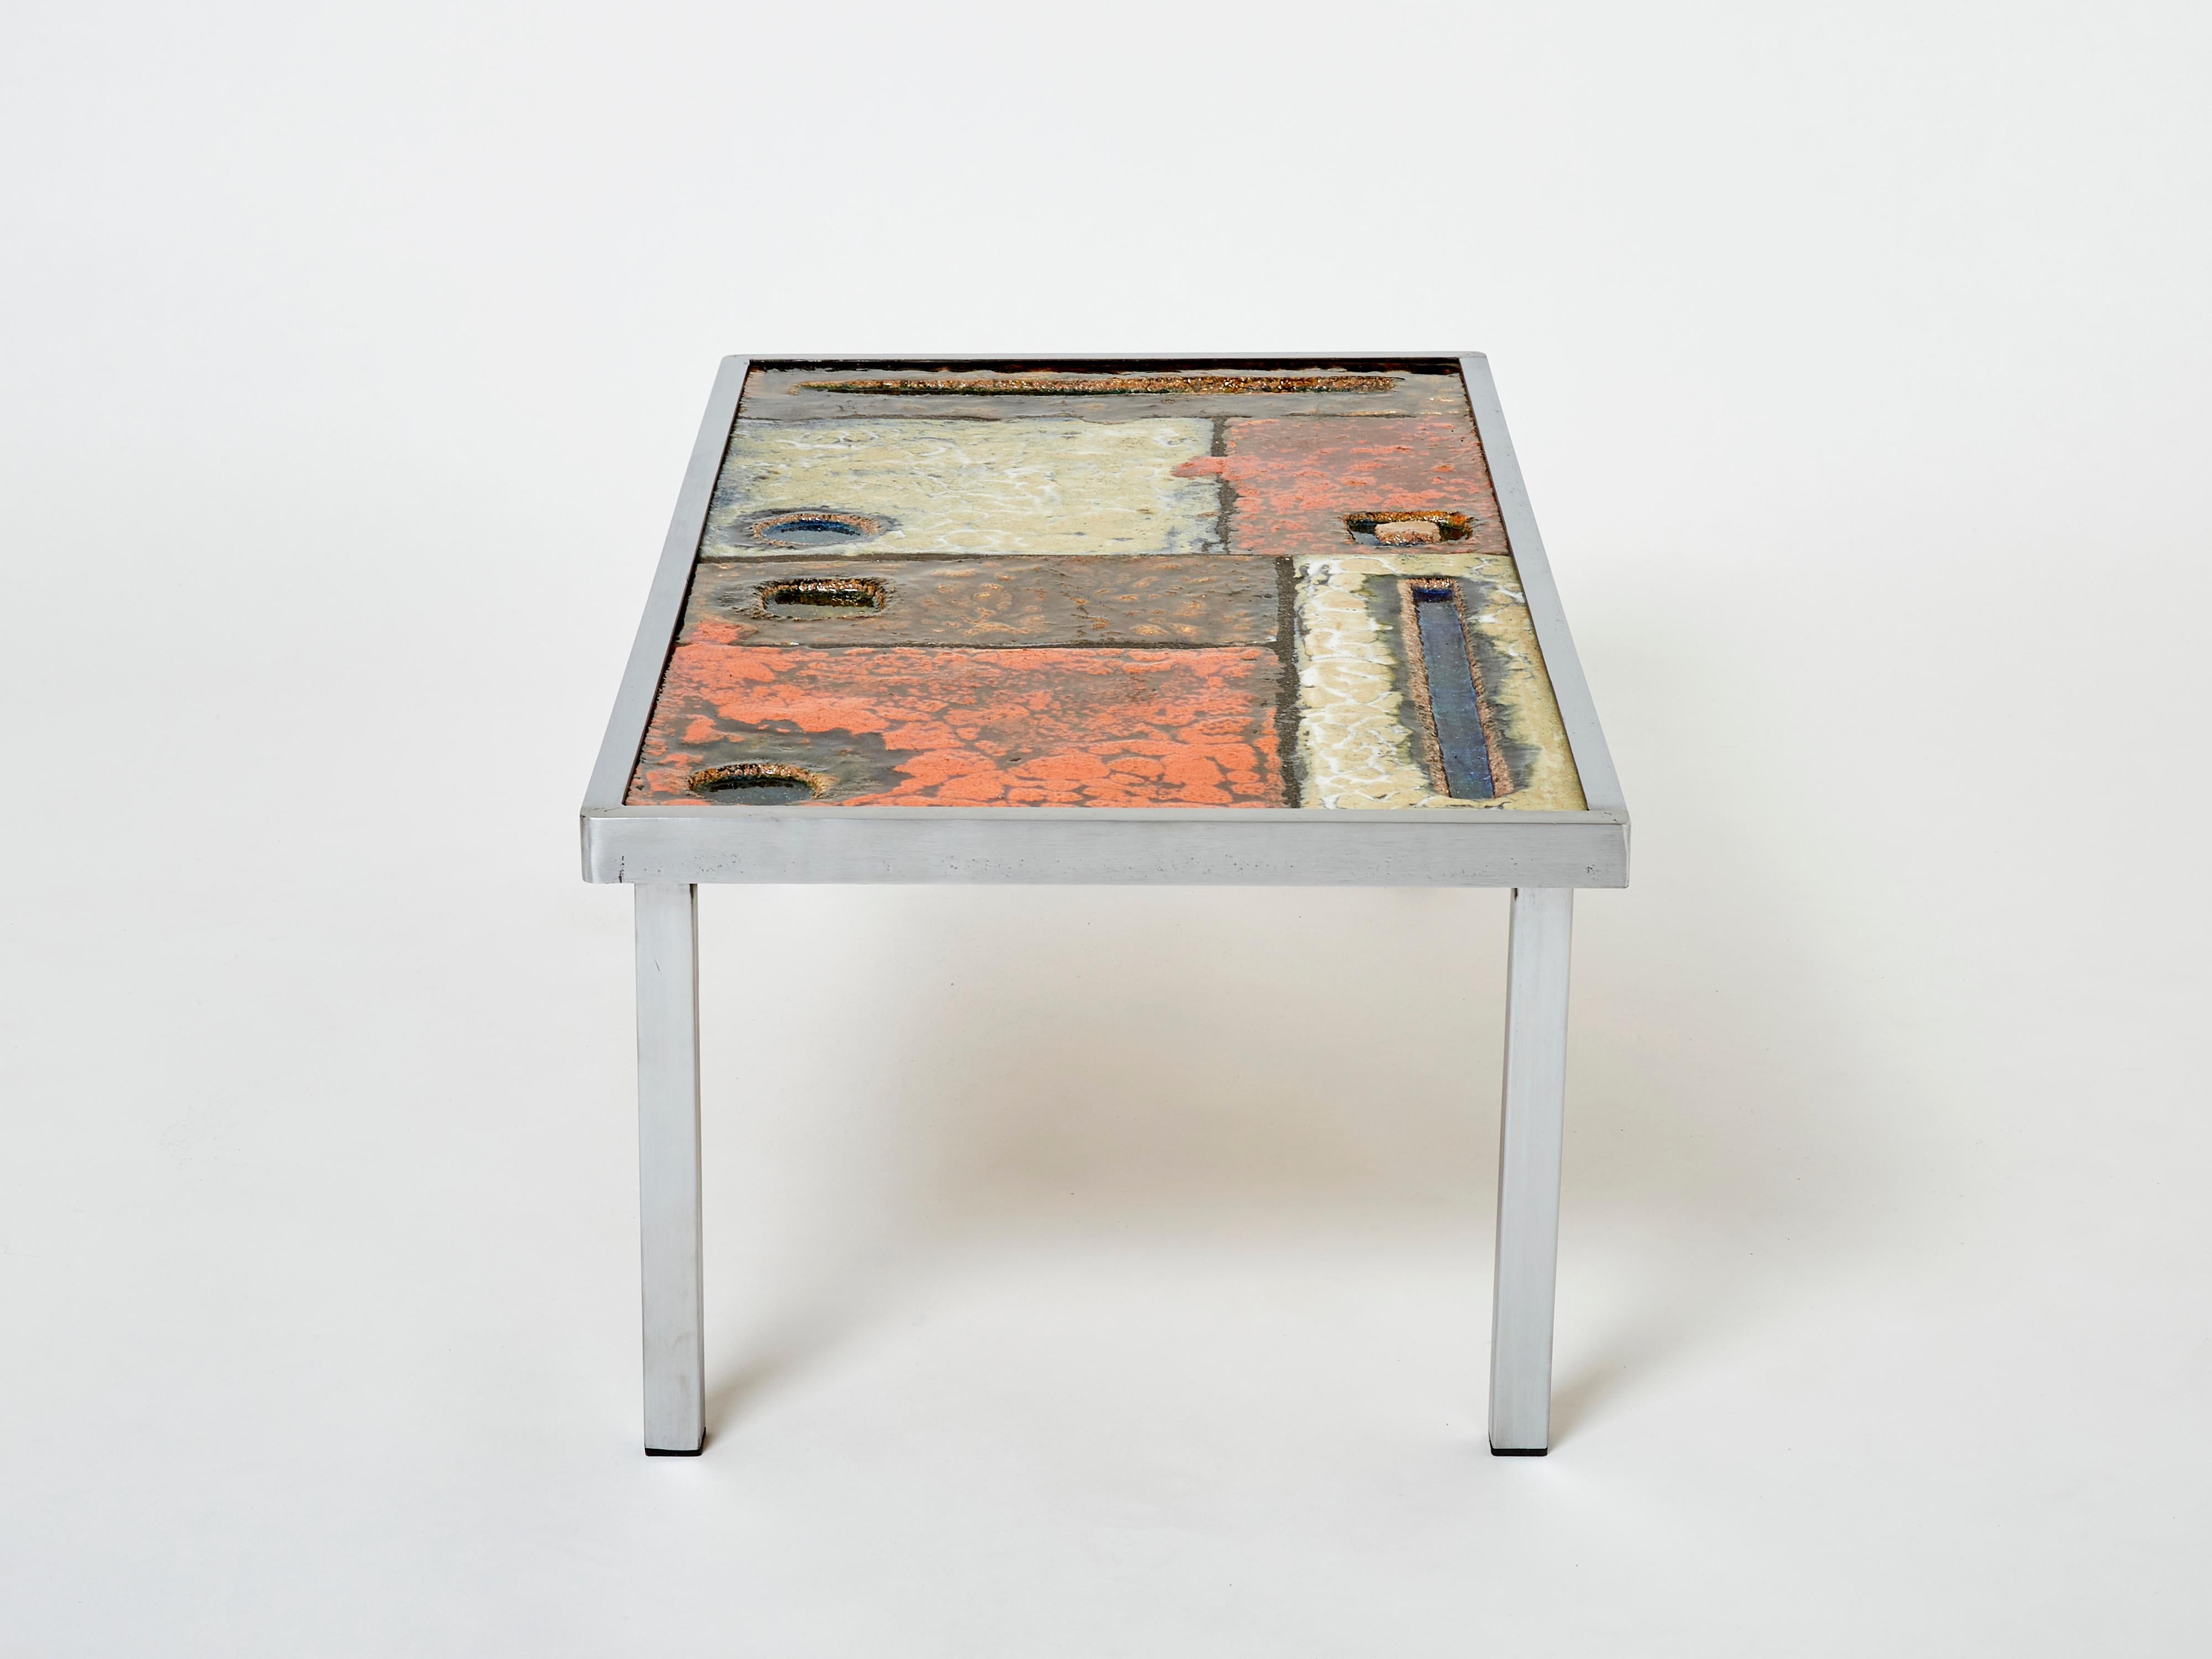 Robert and Jean Cloutier Ceramic Steel Coffee Table, 1950s For Sale 2